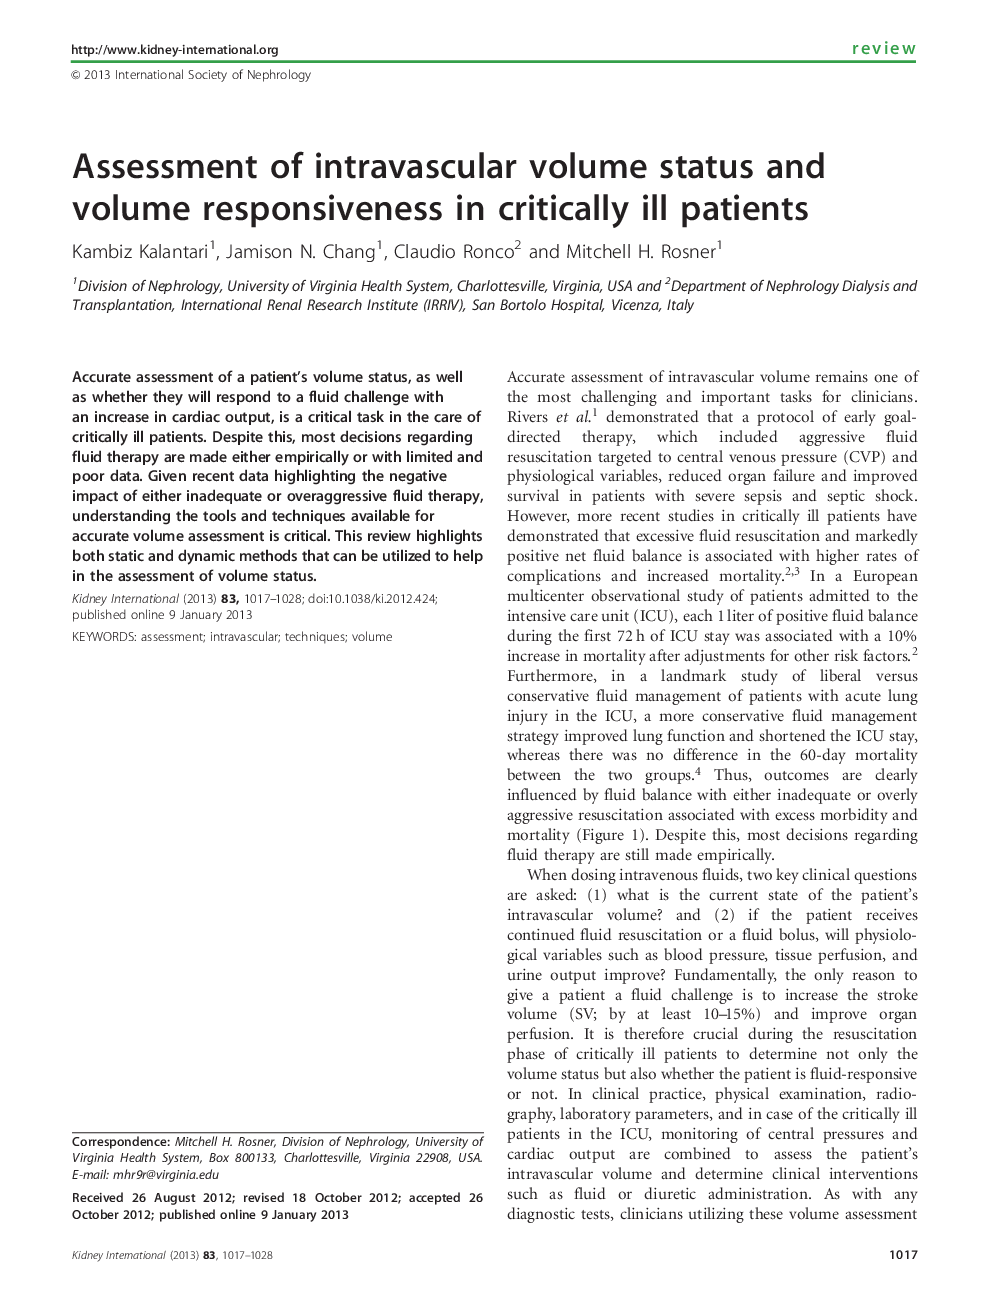 Assessment of intravascular volume status and volume responsiveness in critically ill patients